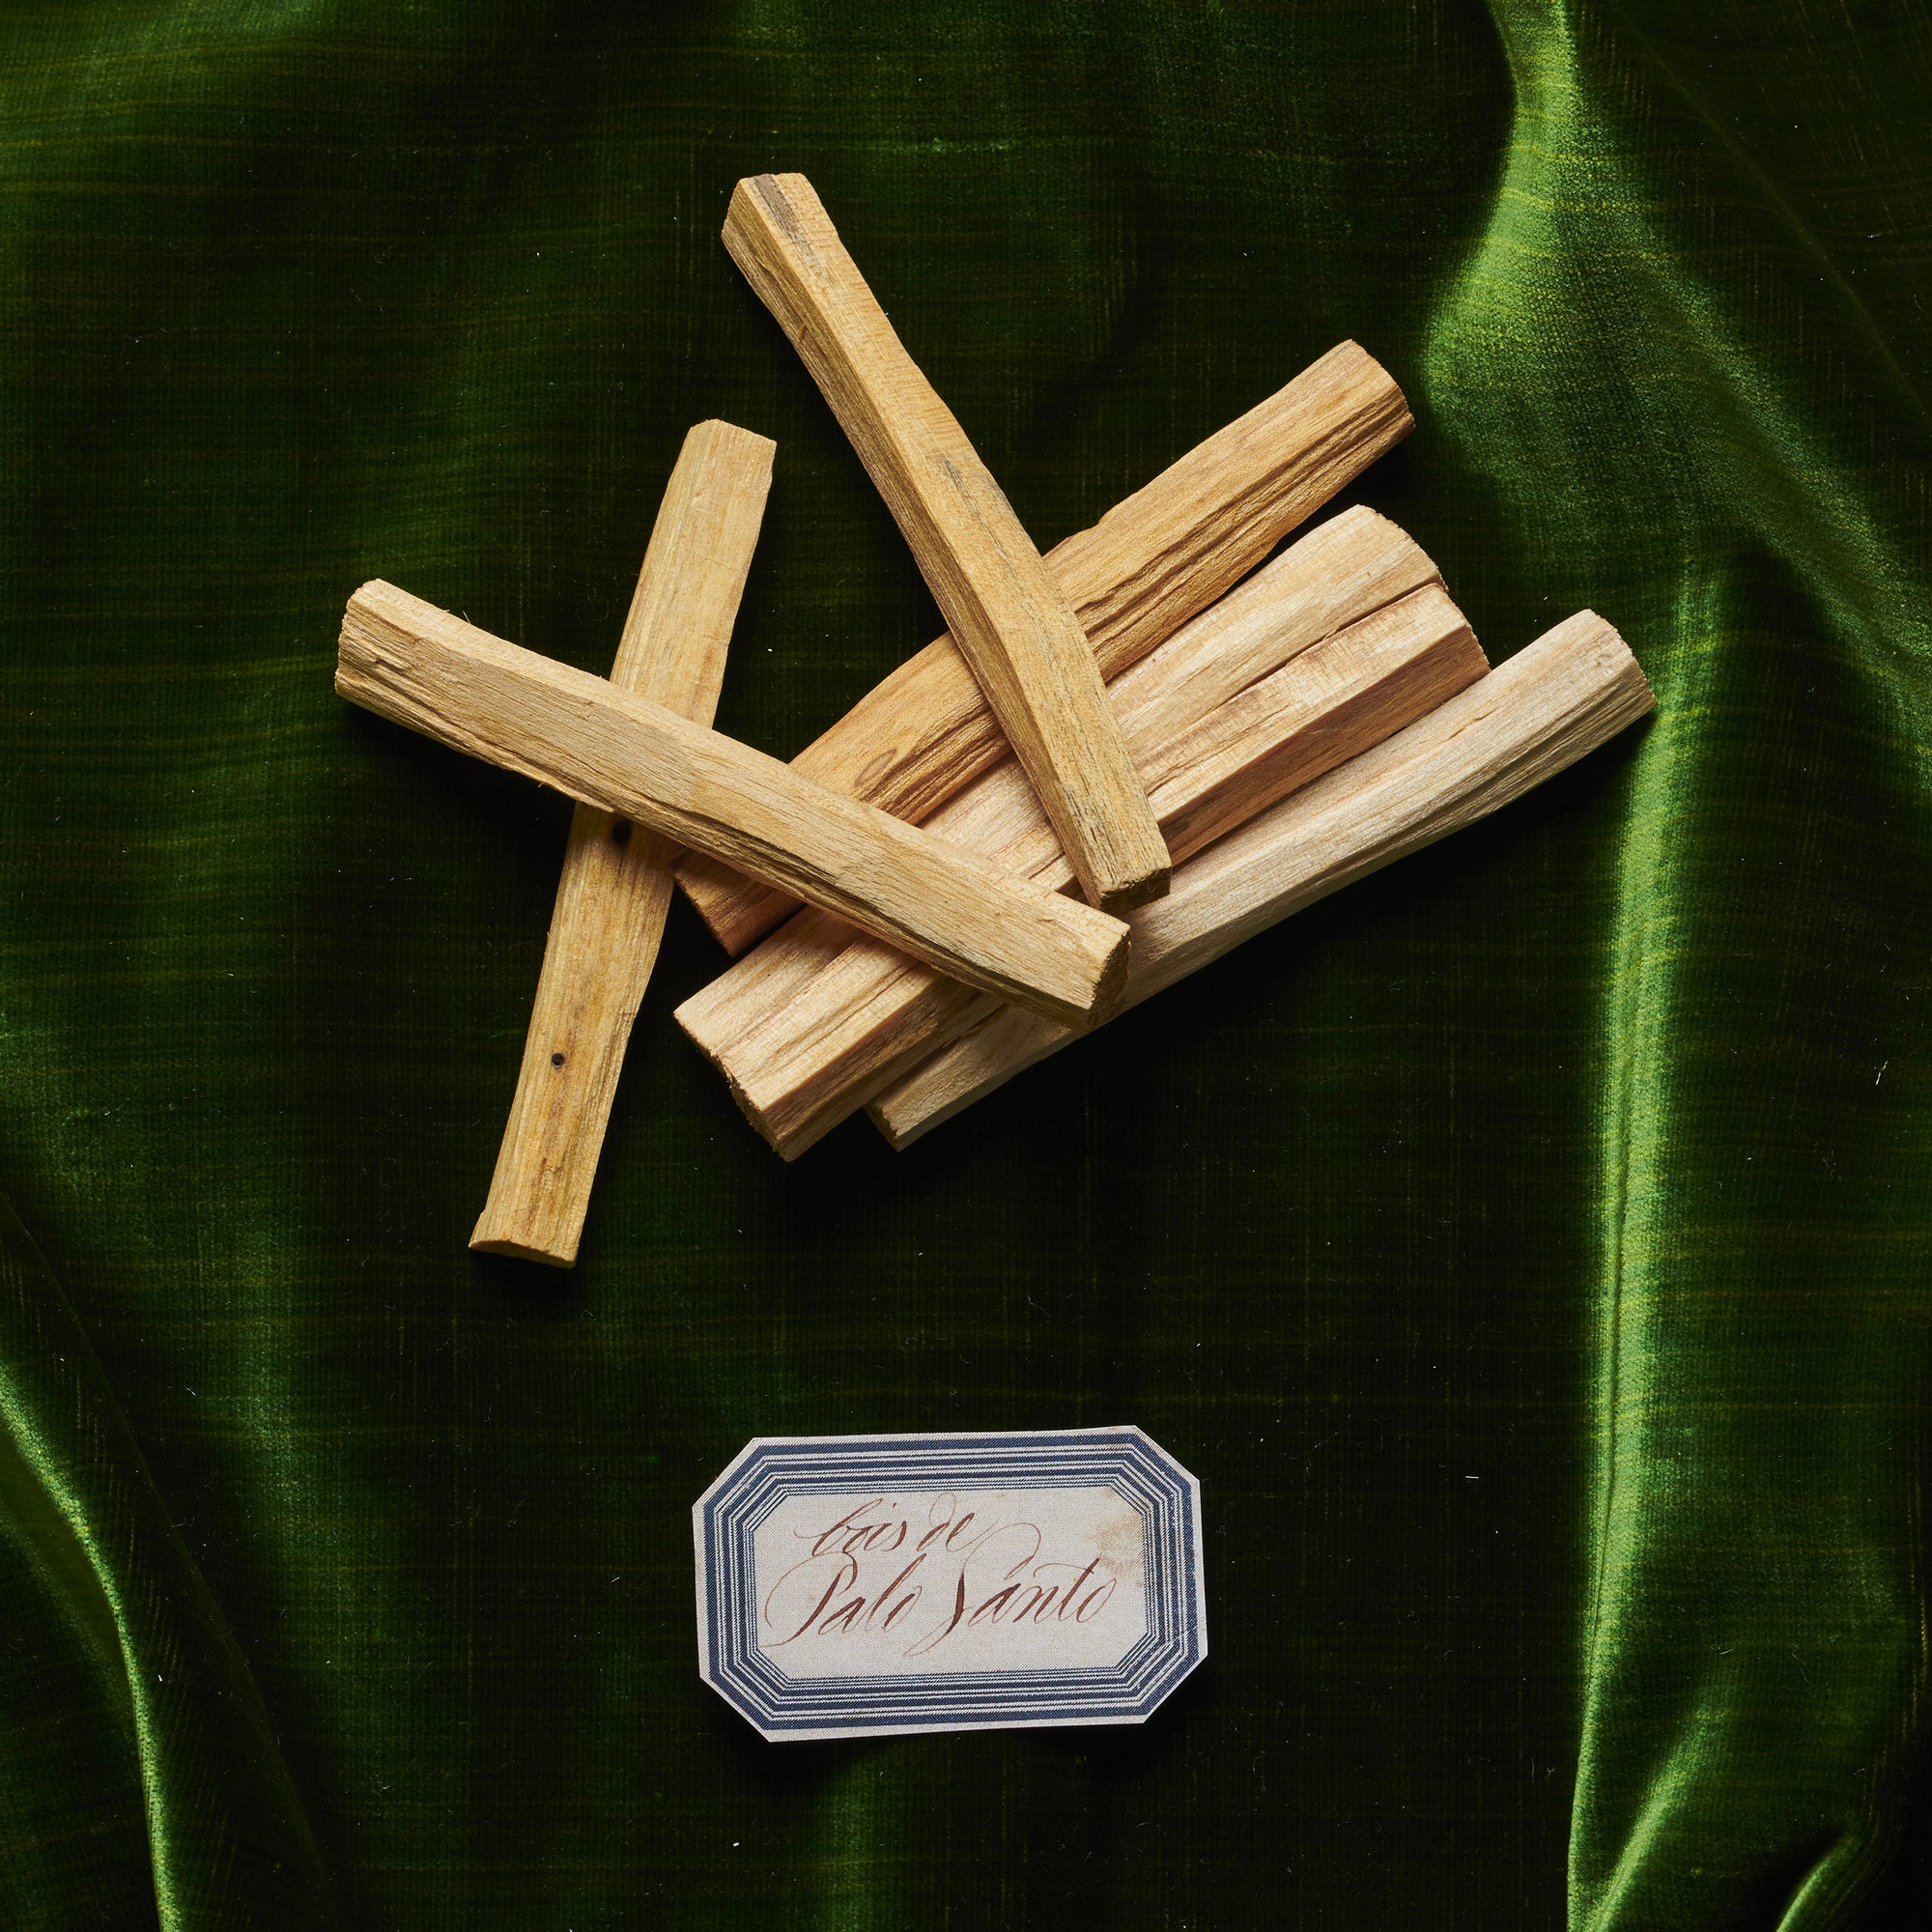 SCENTED MATCHES – Officine Universelle Buly